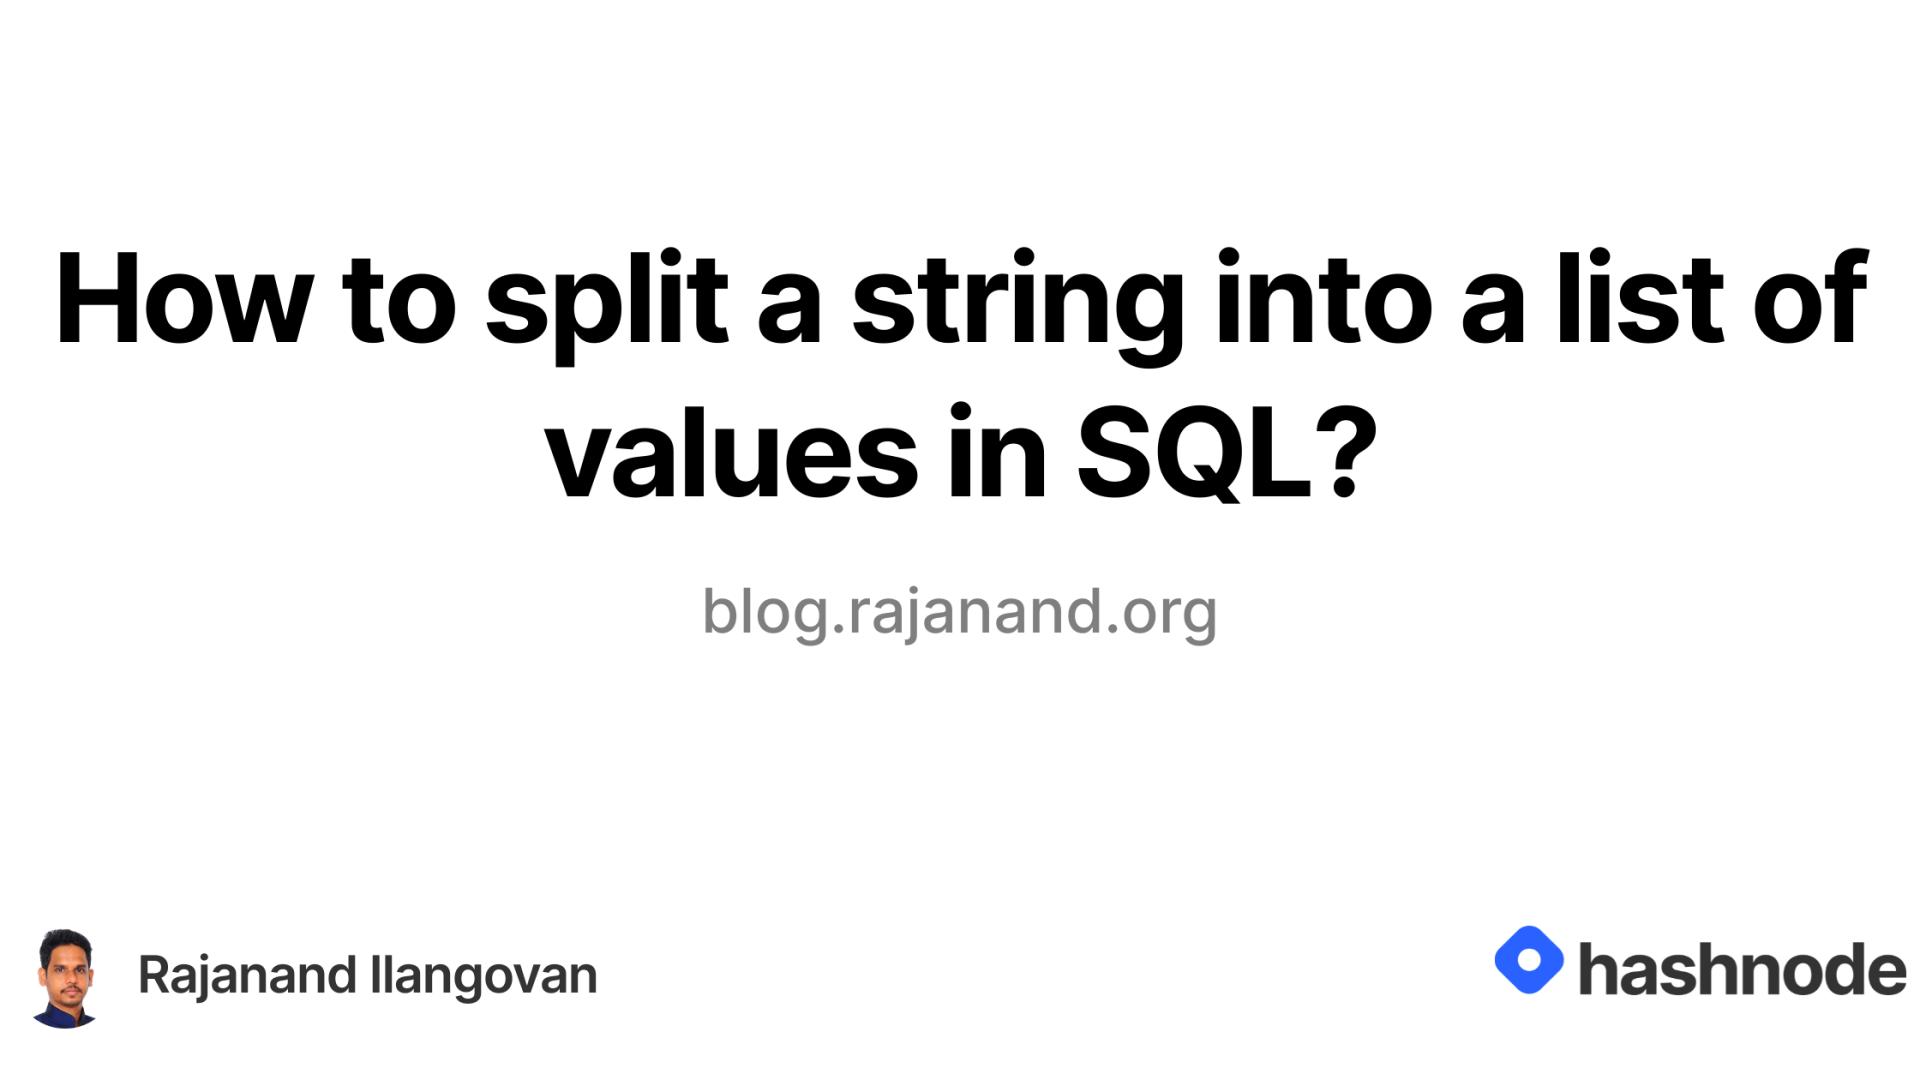 How to split a string into a list of values in SQL?